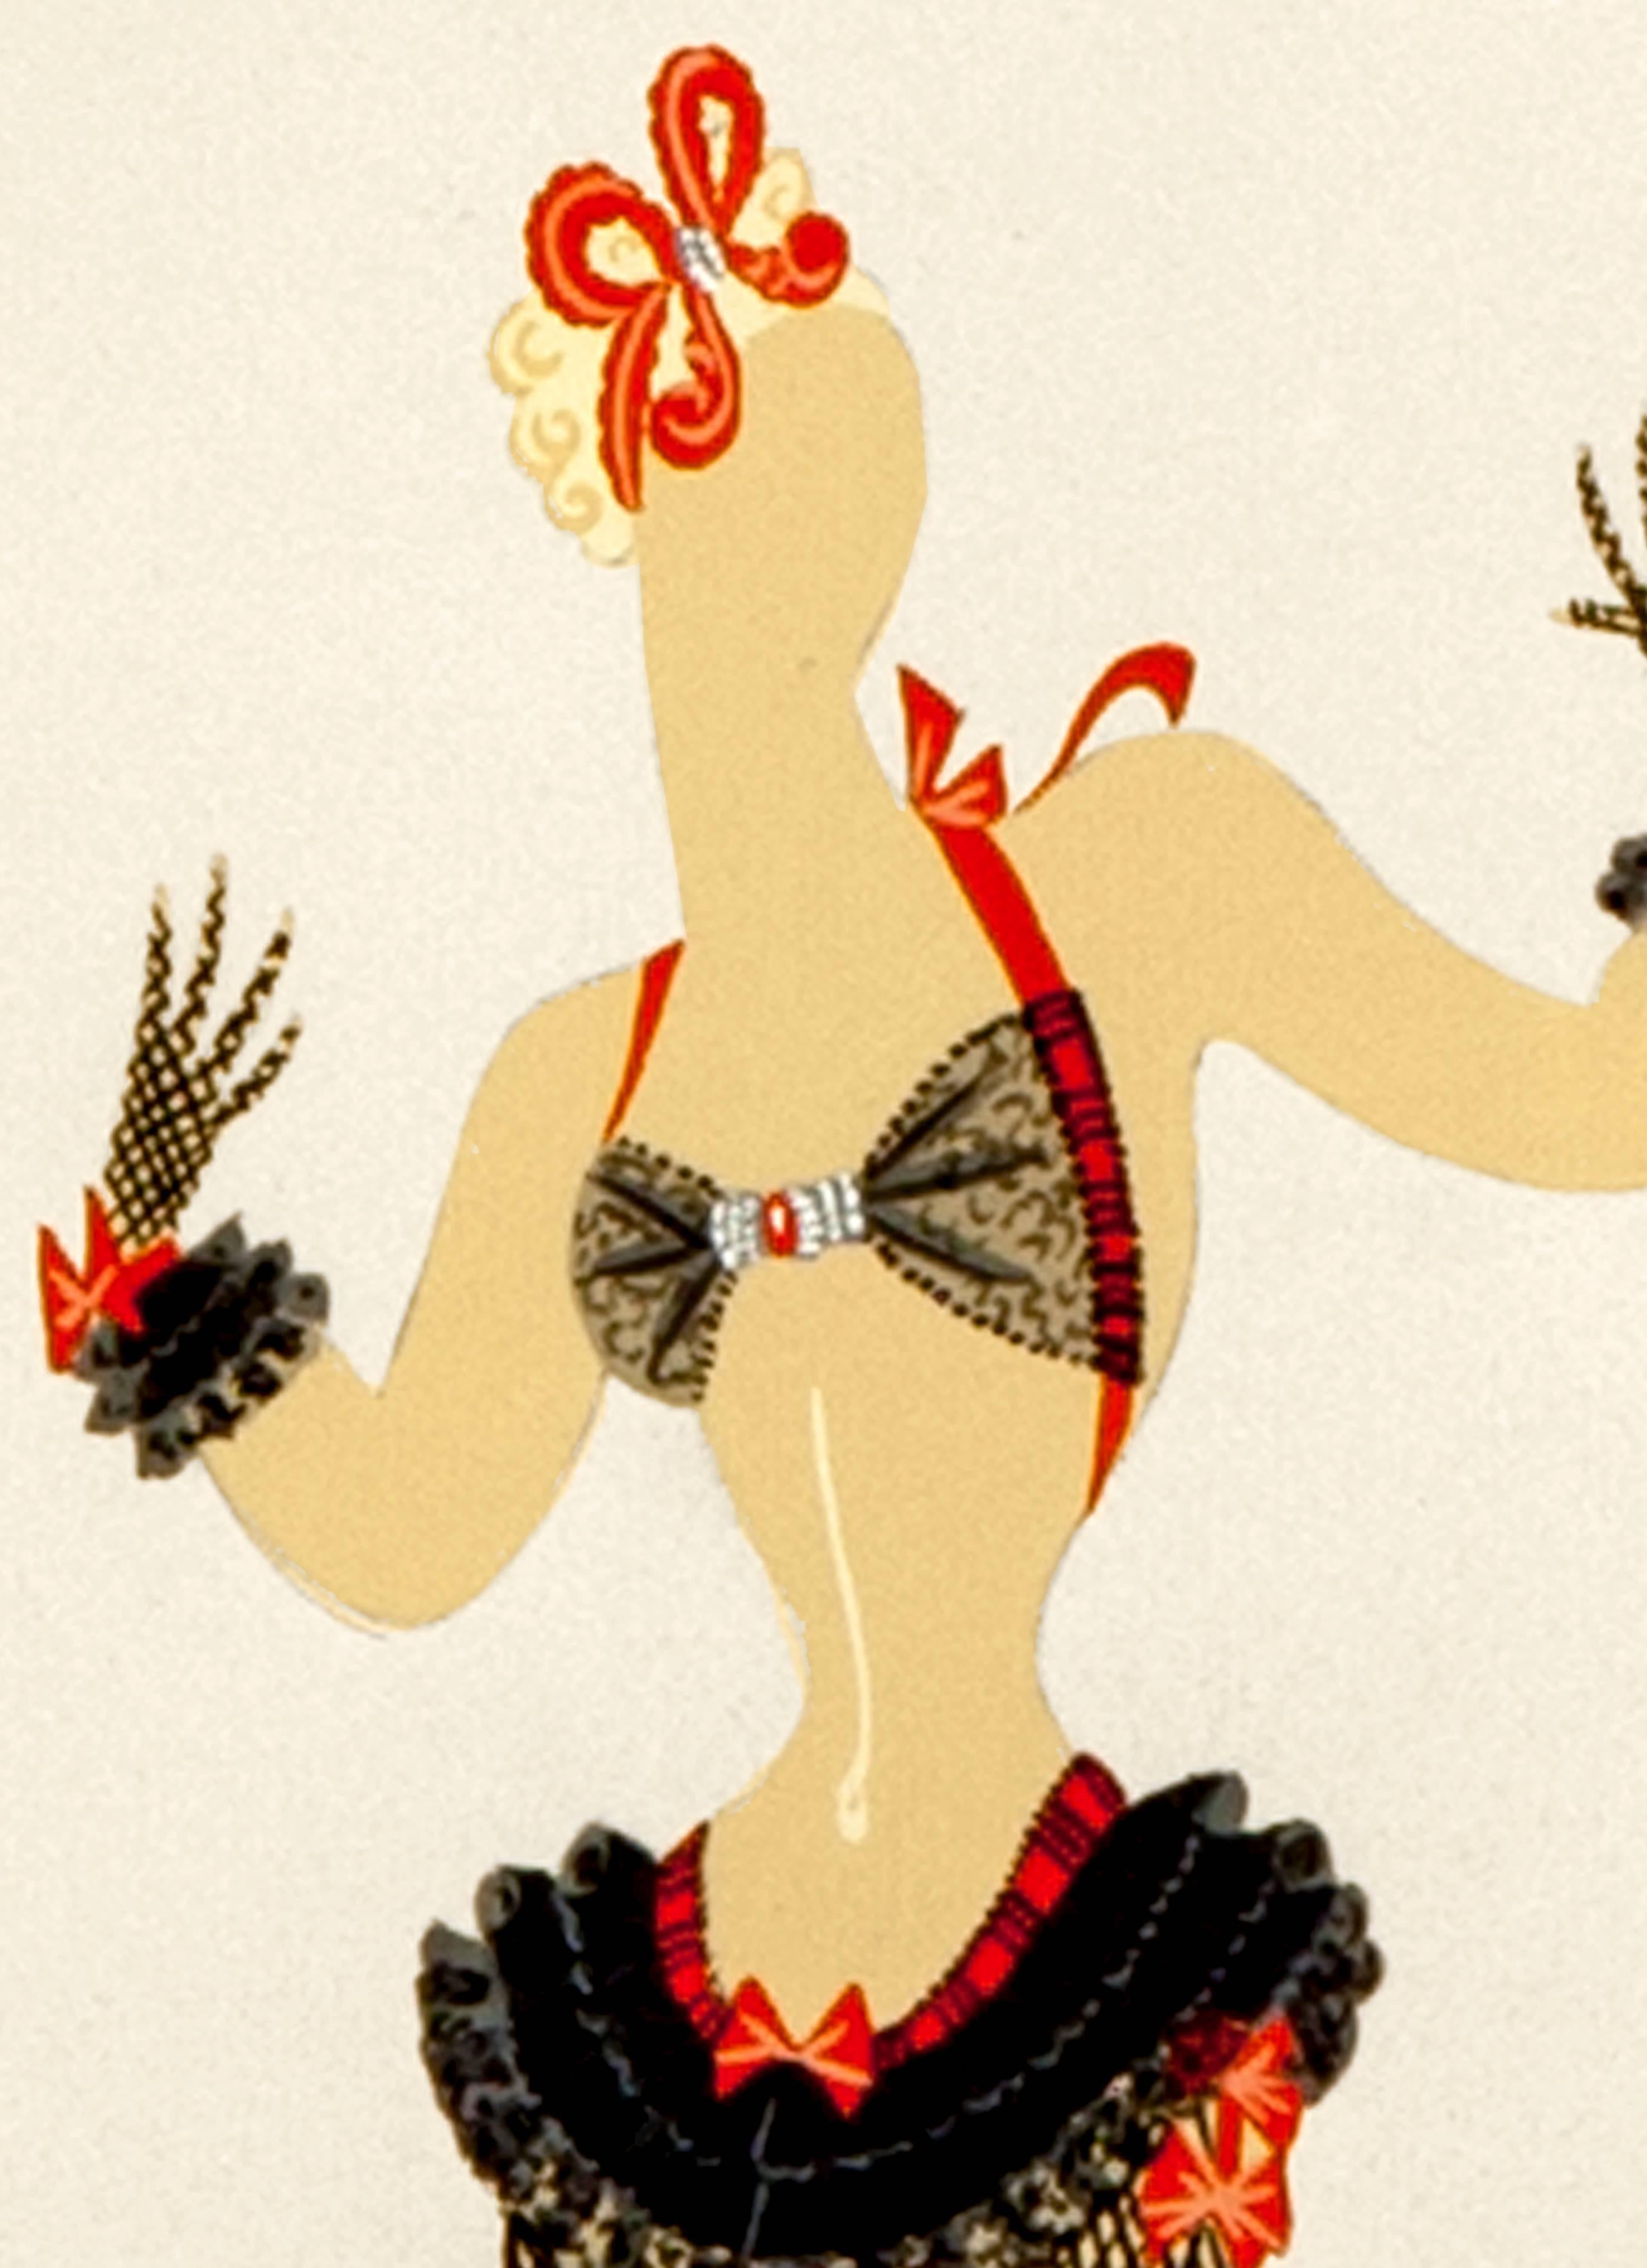 Signed original gouache painting by Romain de Tirtoff, aka Erté. This very rare original features a woman wearing fishnet stockings and a pearl-and-lace top with black gloves and a red hair bow. 

